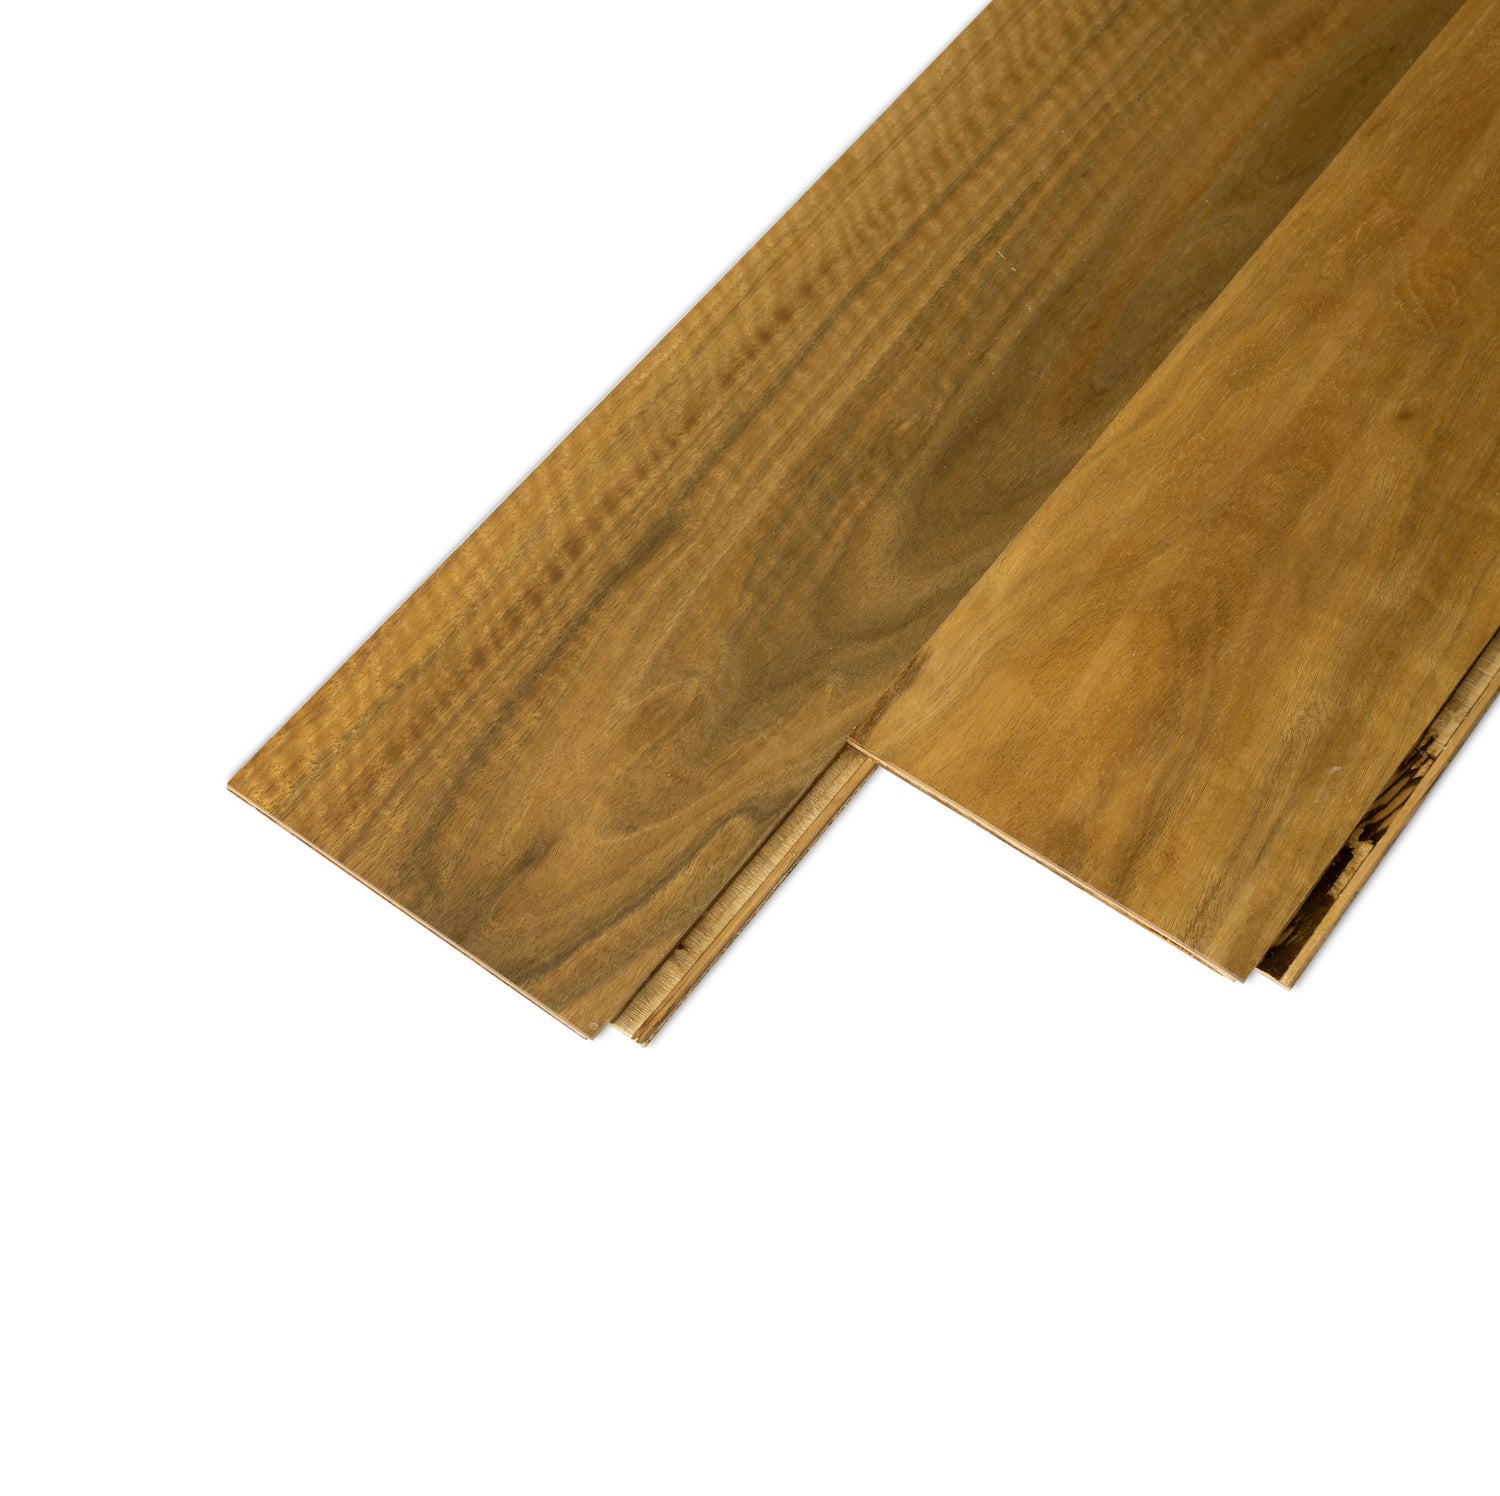 Spotted Gum Wideboard Timber Flooring Smooth Matte